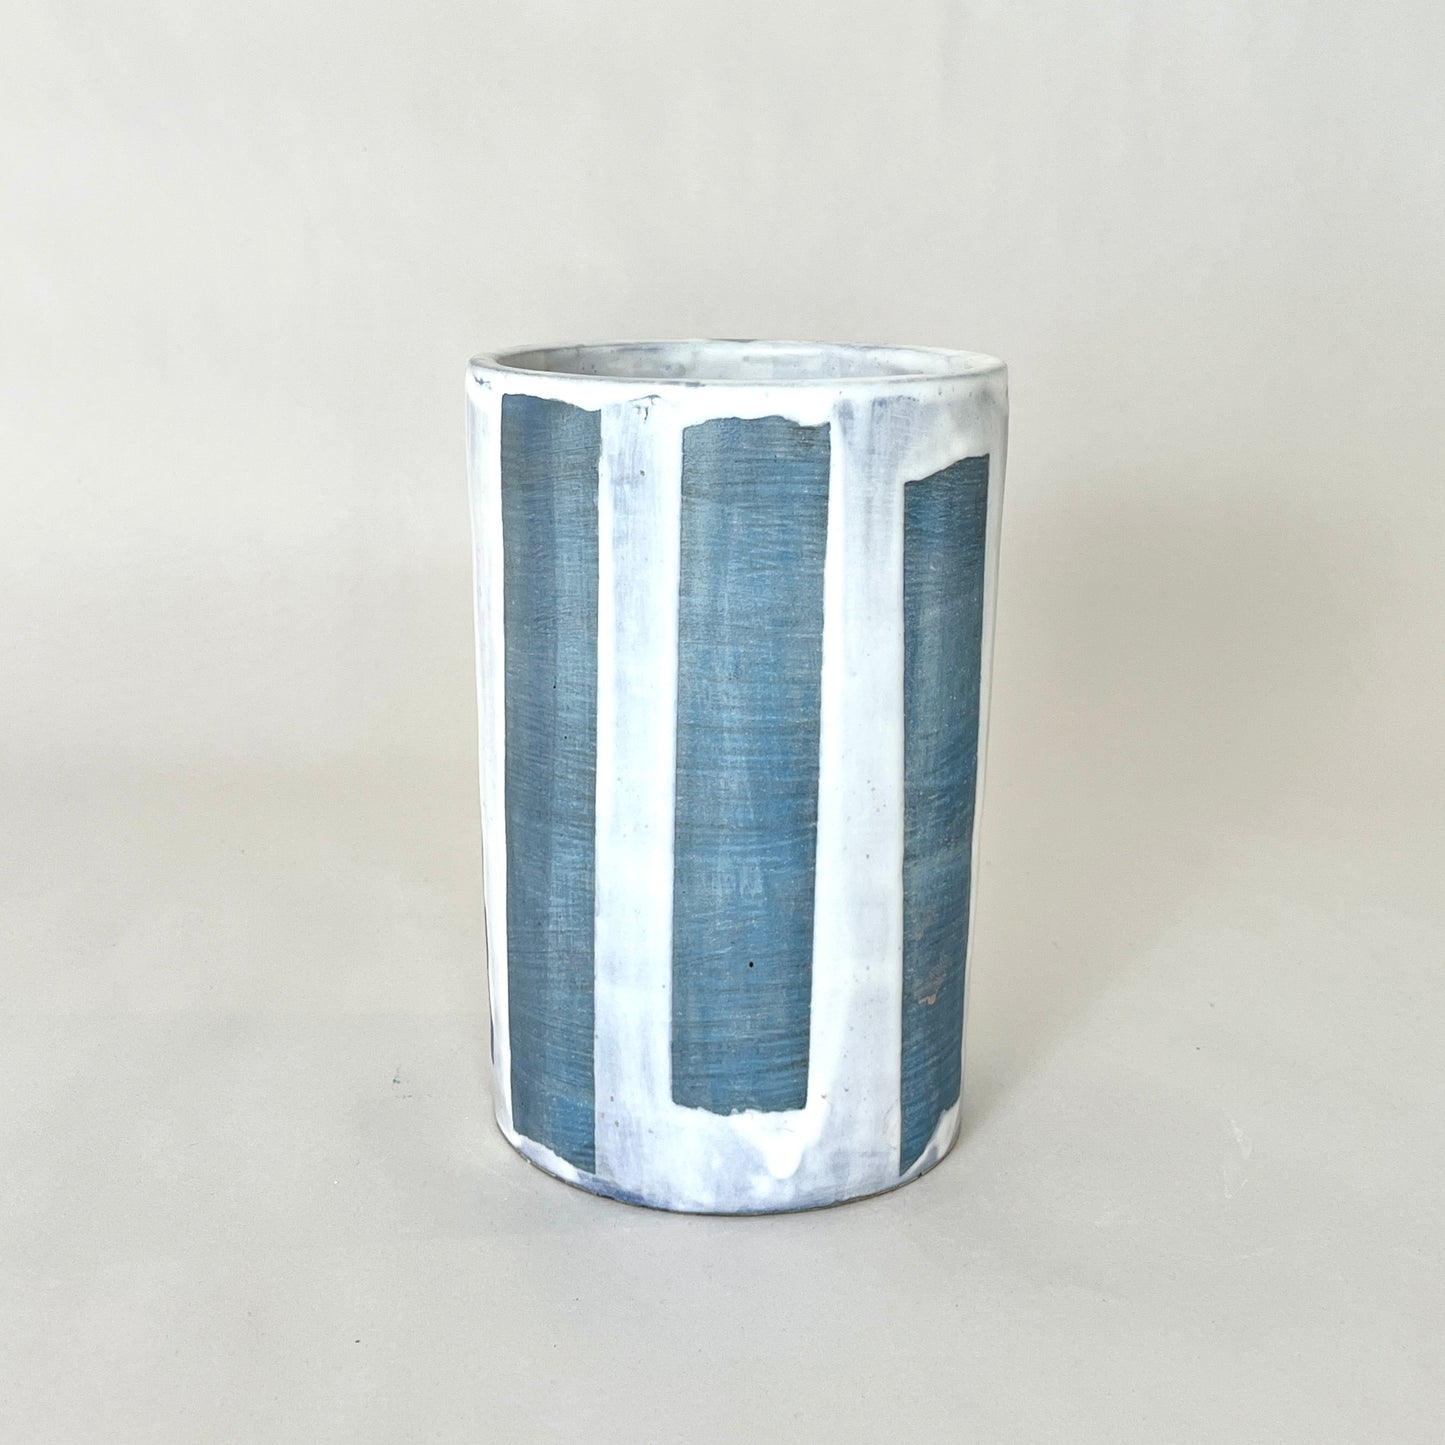 Painter Tape Cylinder, White/Blue No.1